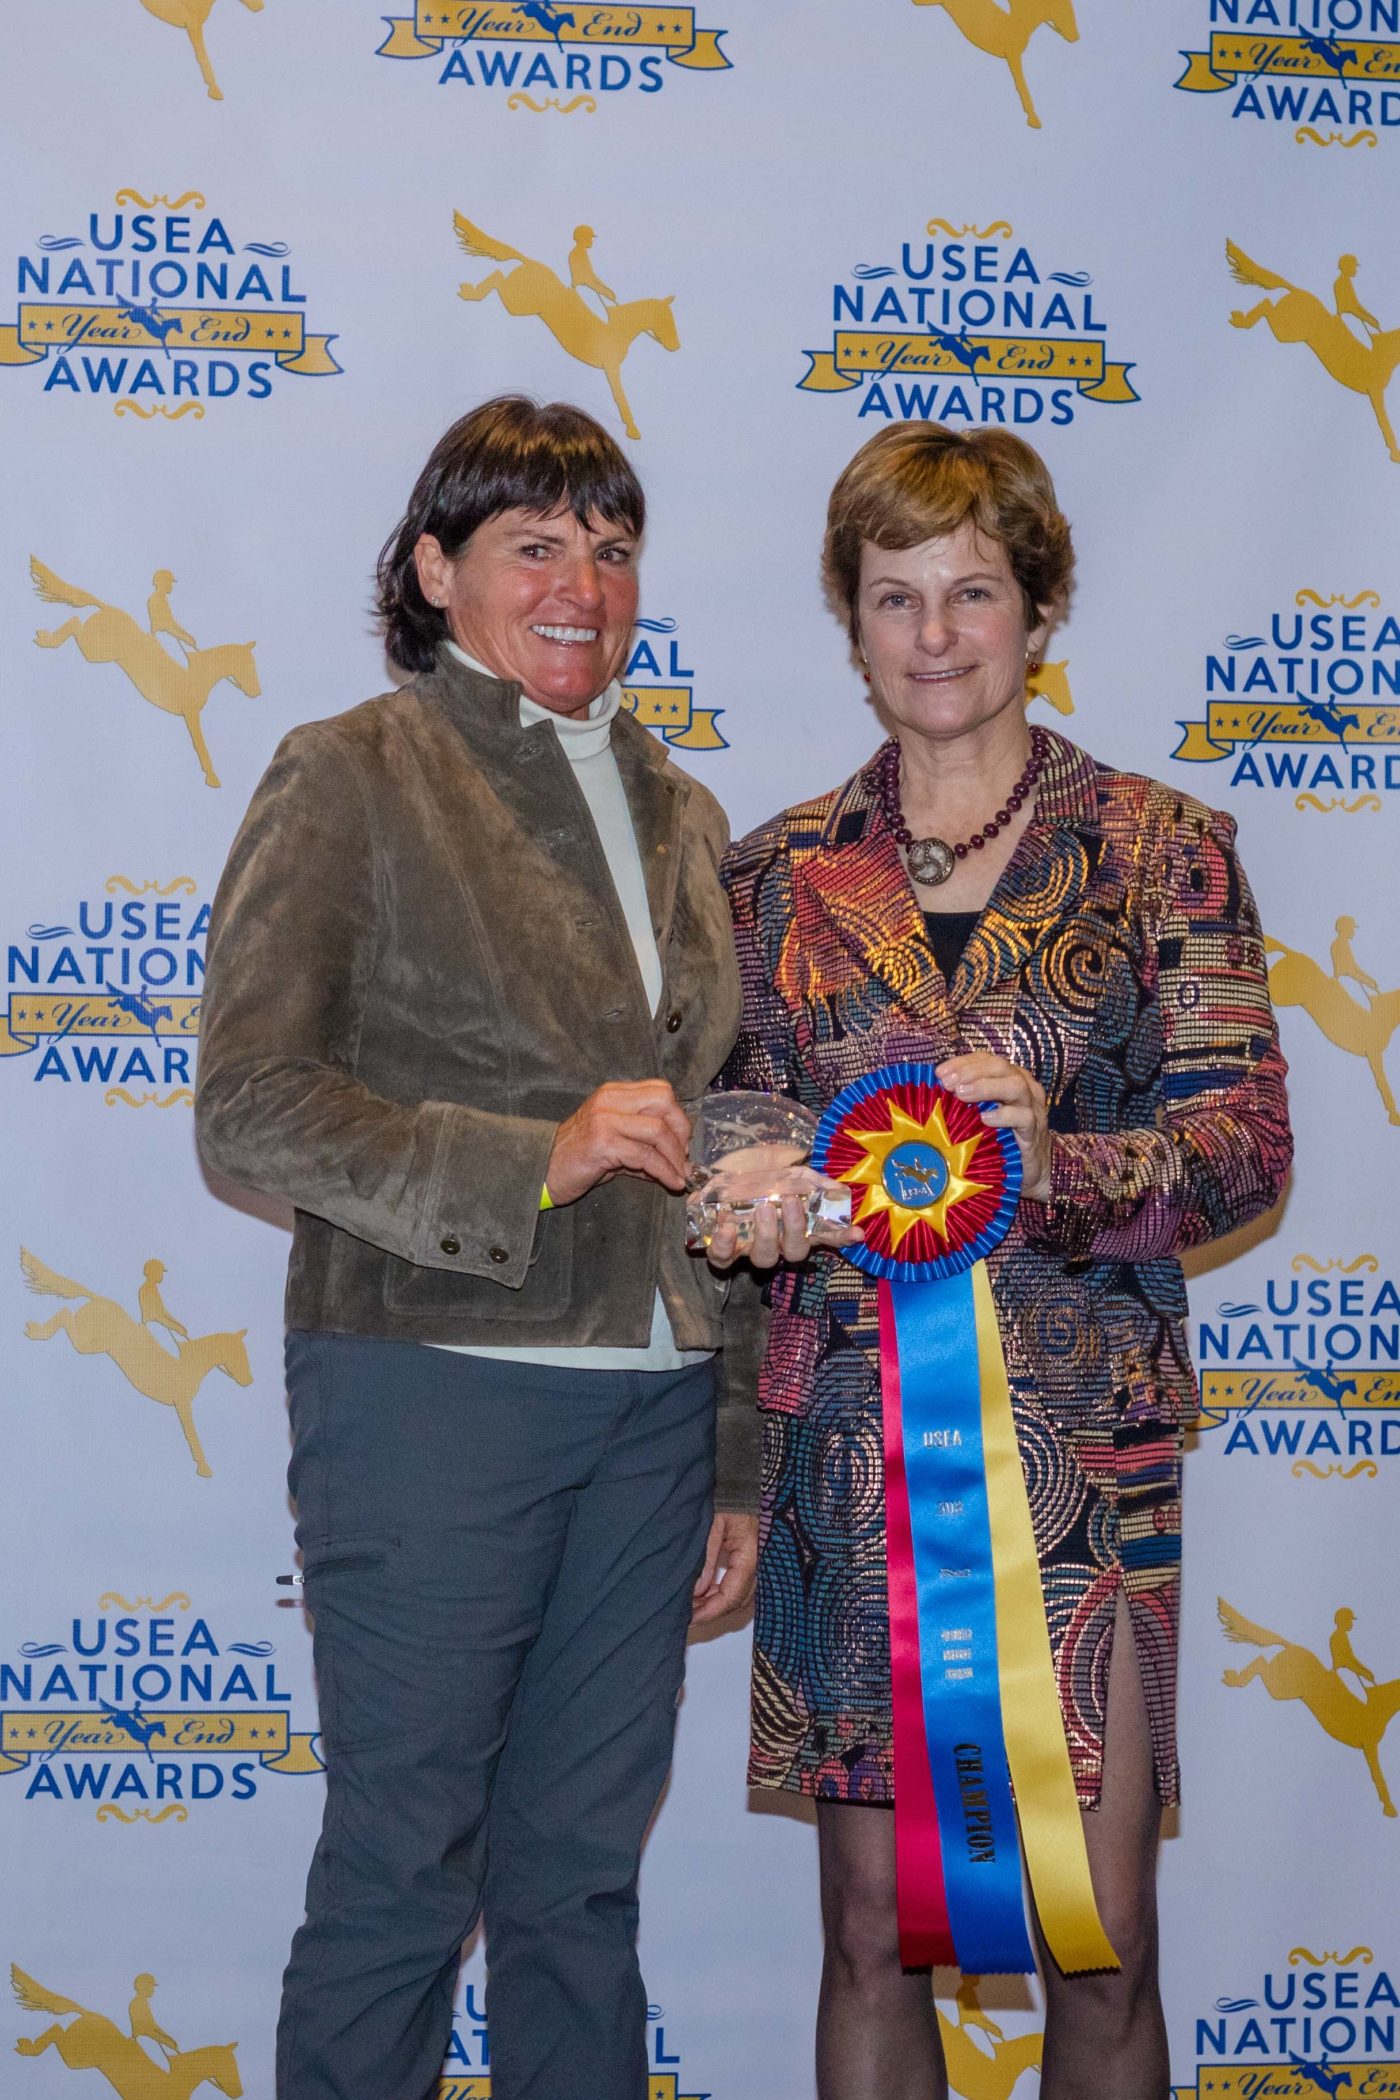 The 2018 Sunsprite Warmbloods Volunteer of the Year is Vicki Reynolds.